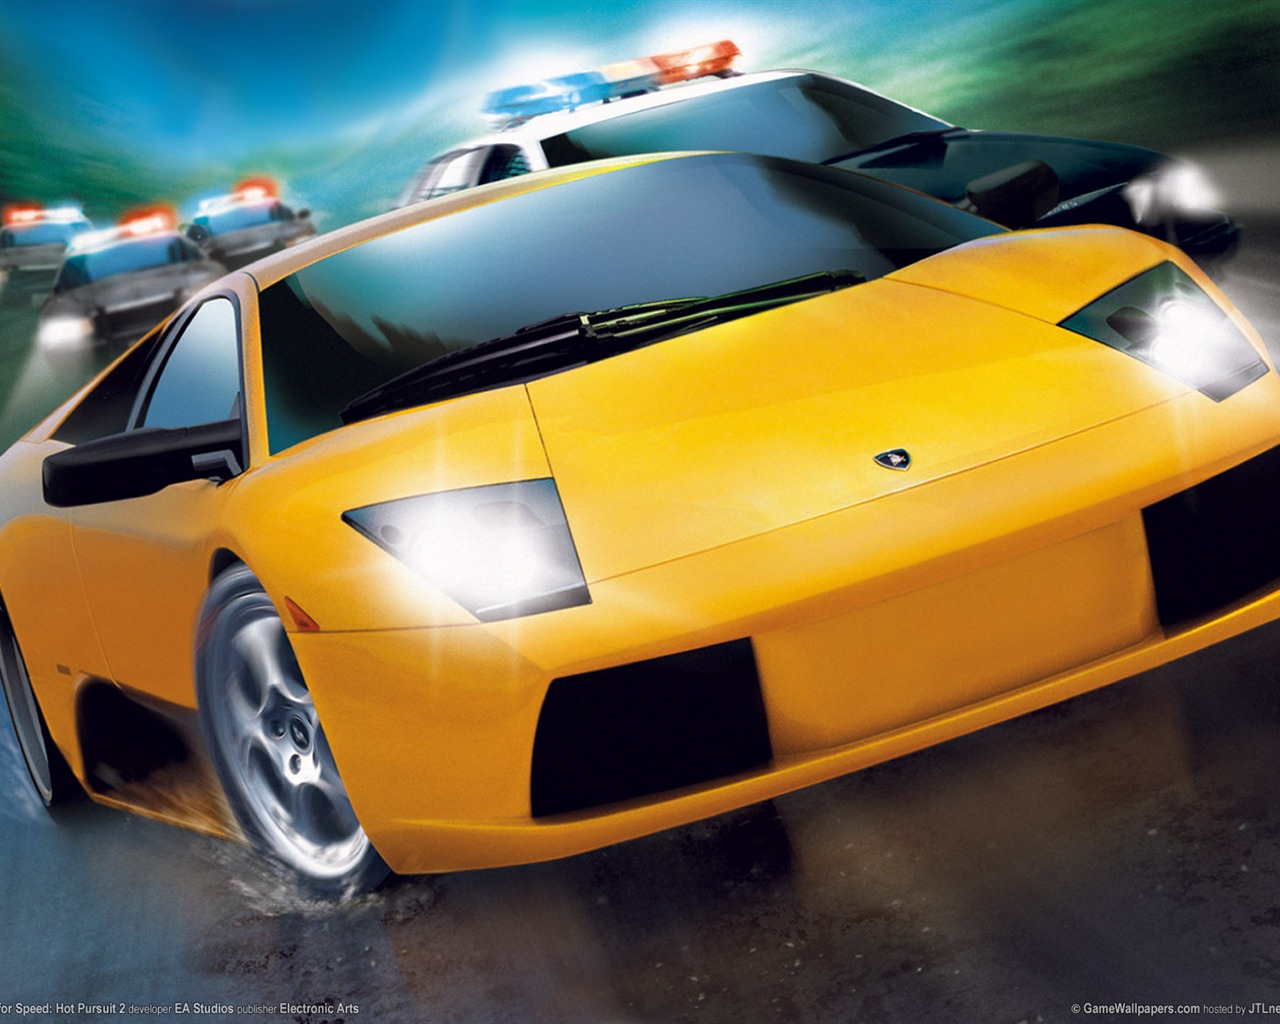 Need for Speed: Hot Pursuit 極品飛車14：熱力追踪 #8 - 1280x1024